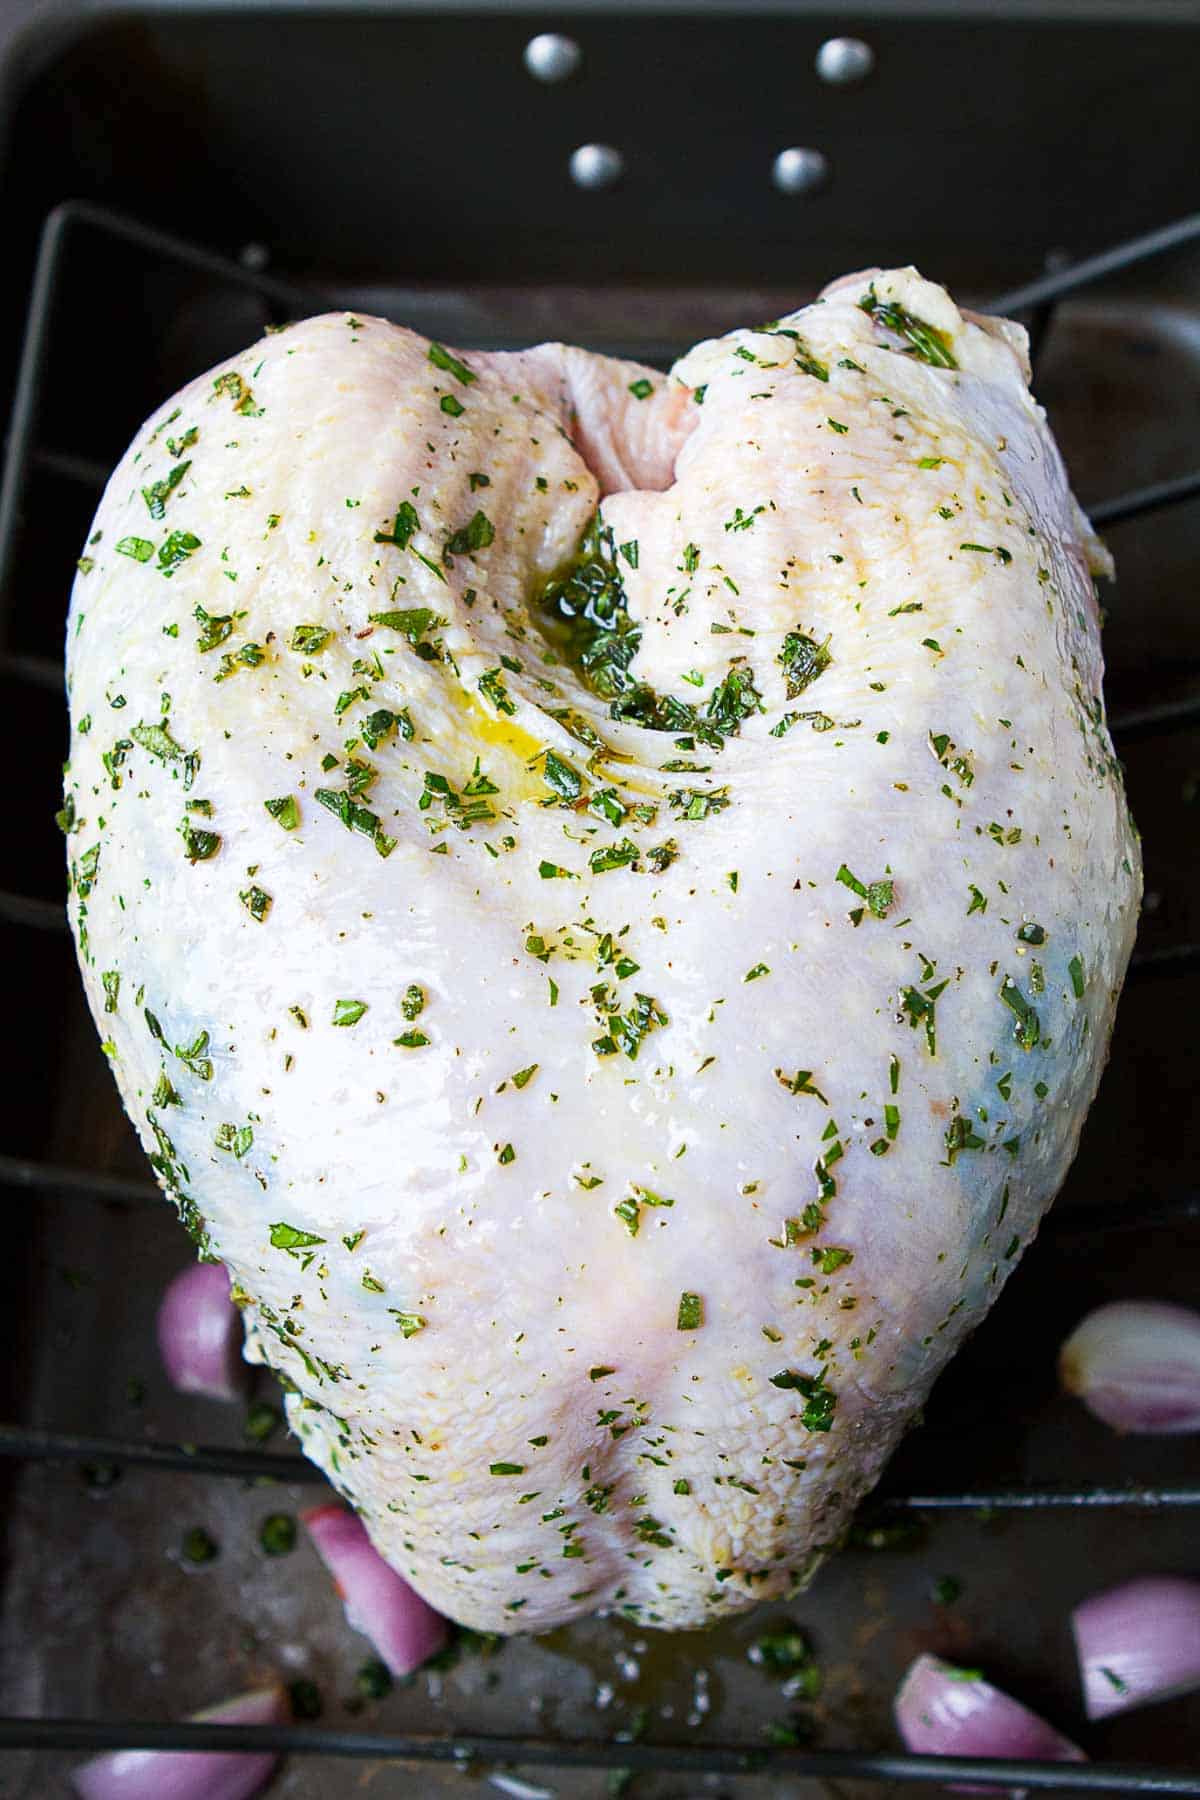 Raw turkey breast rubbed with olive and herbs in a roasting pan.